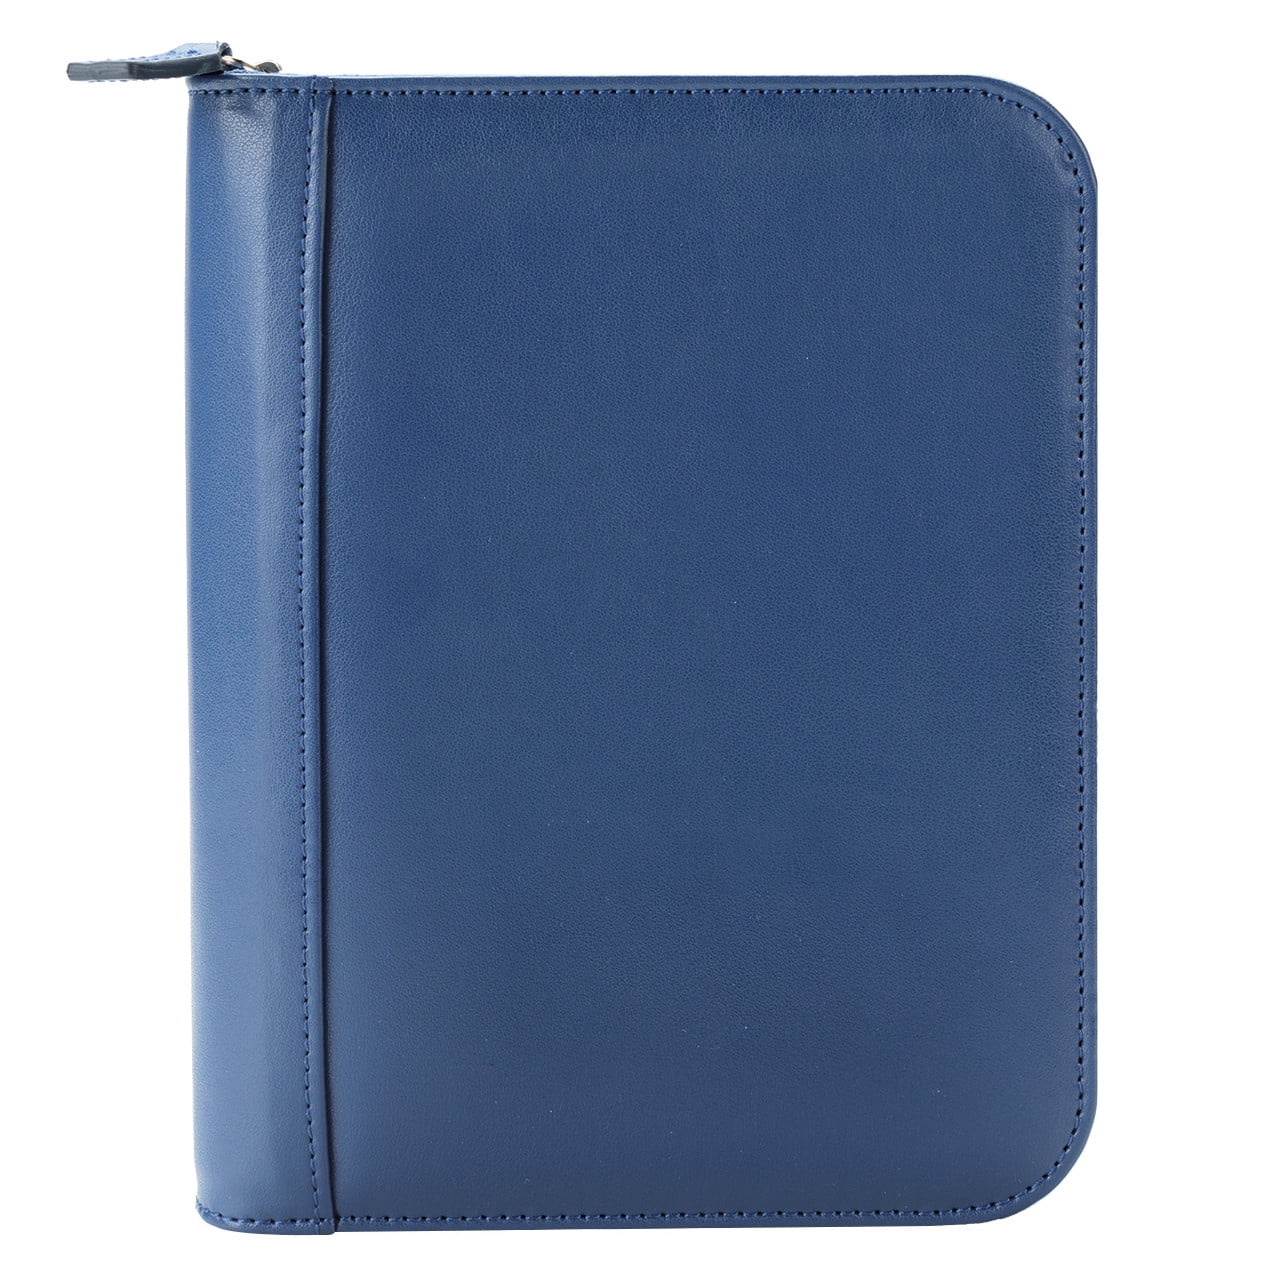 FranklinCovey FC Signature Leather Zipper Binder (Compact Size, Blue) 